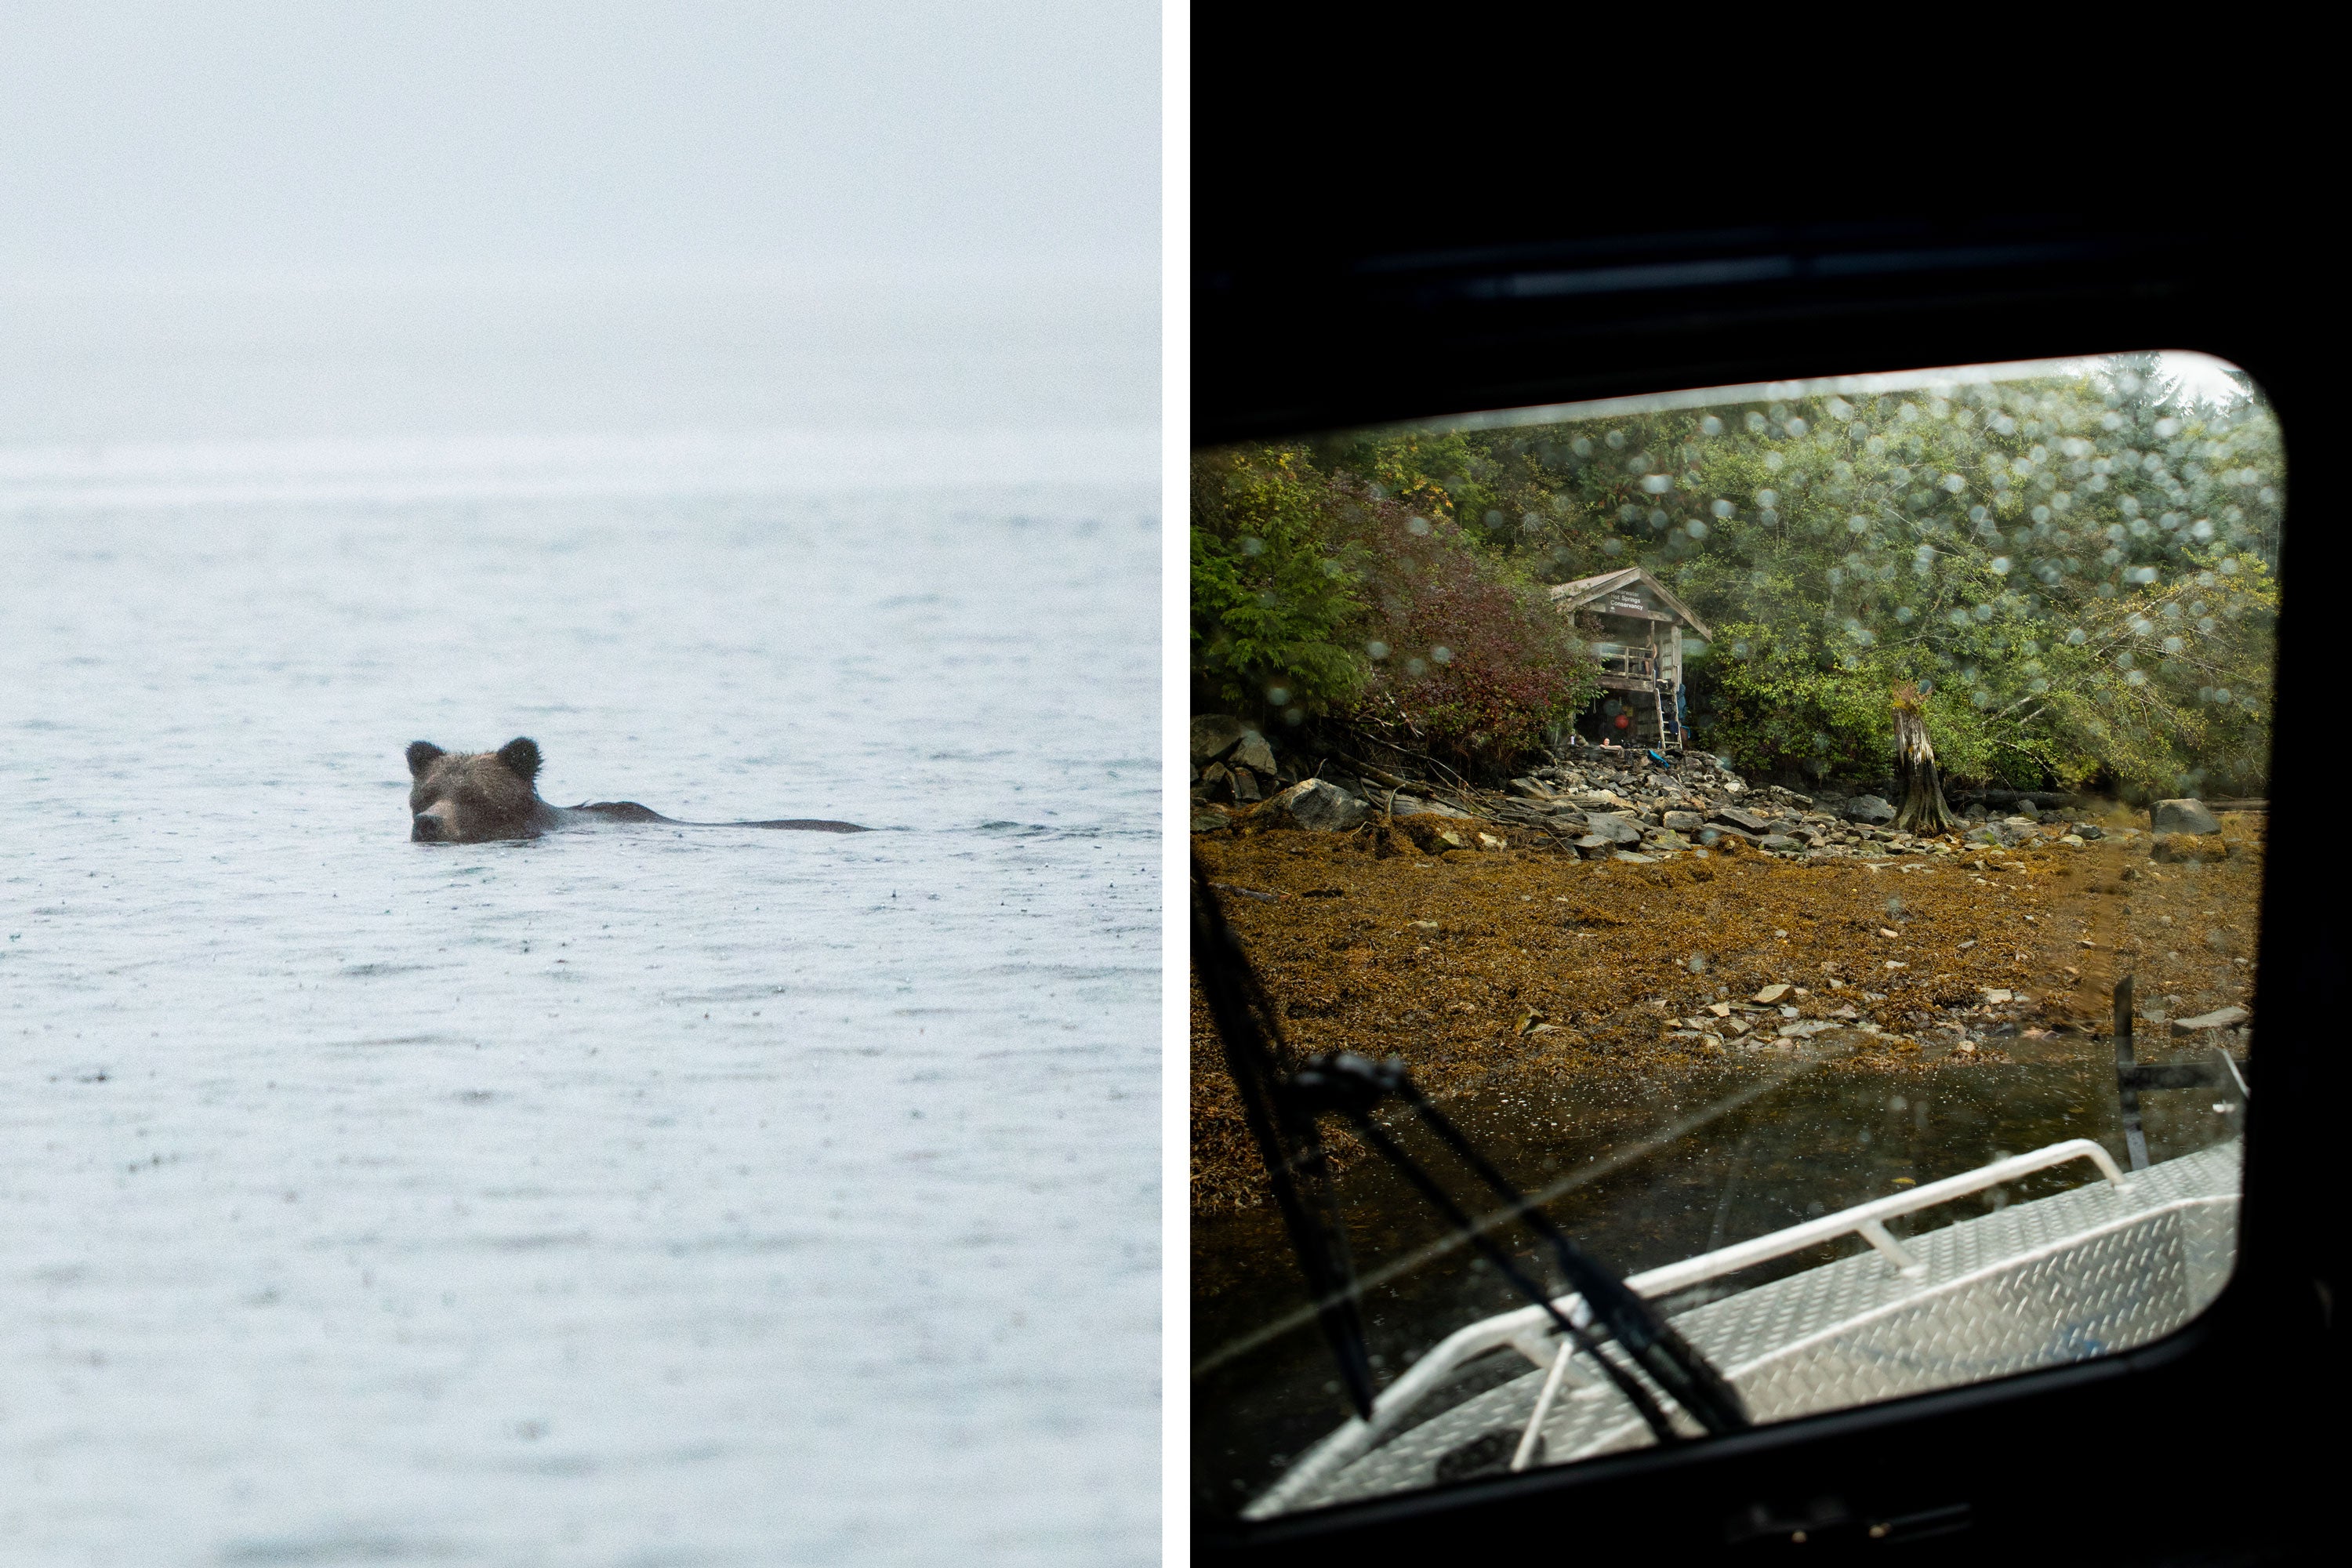 A Grizzly Bear swimming out at sea and a view from a boat window of a wooden cabin on a seaweed covered shore